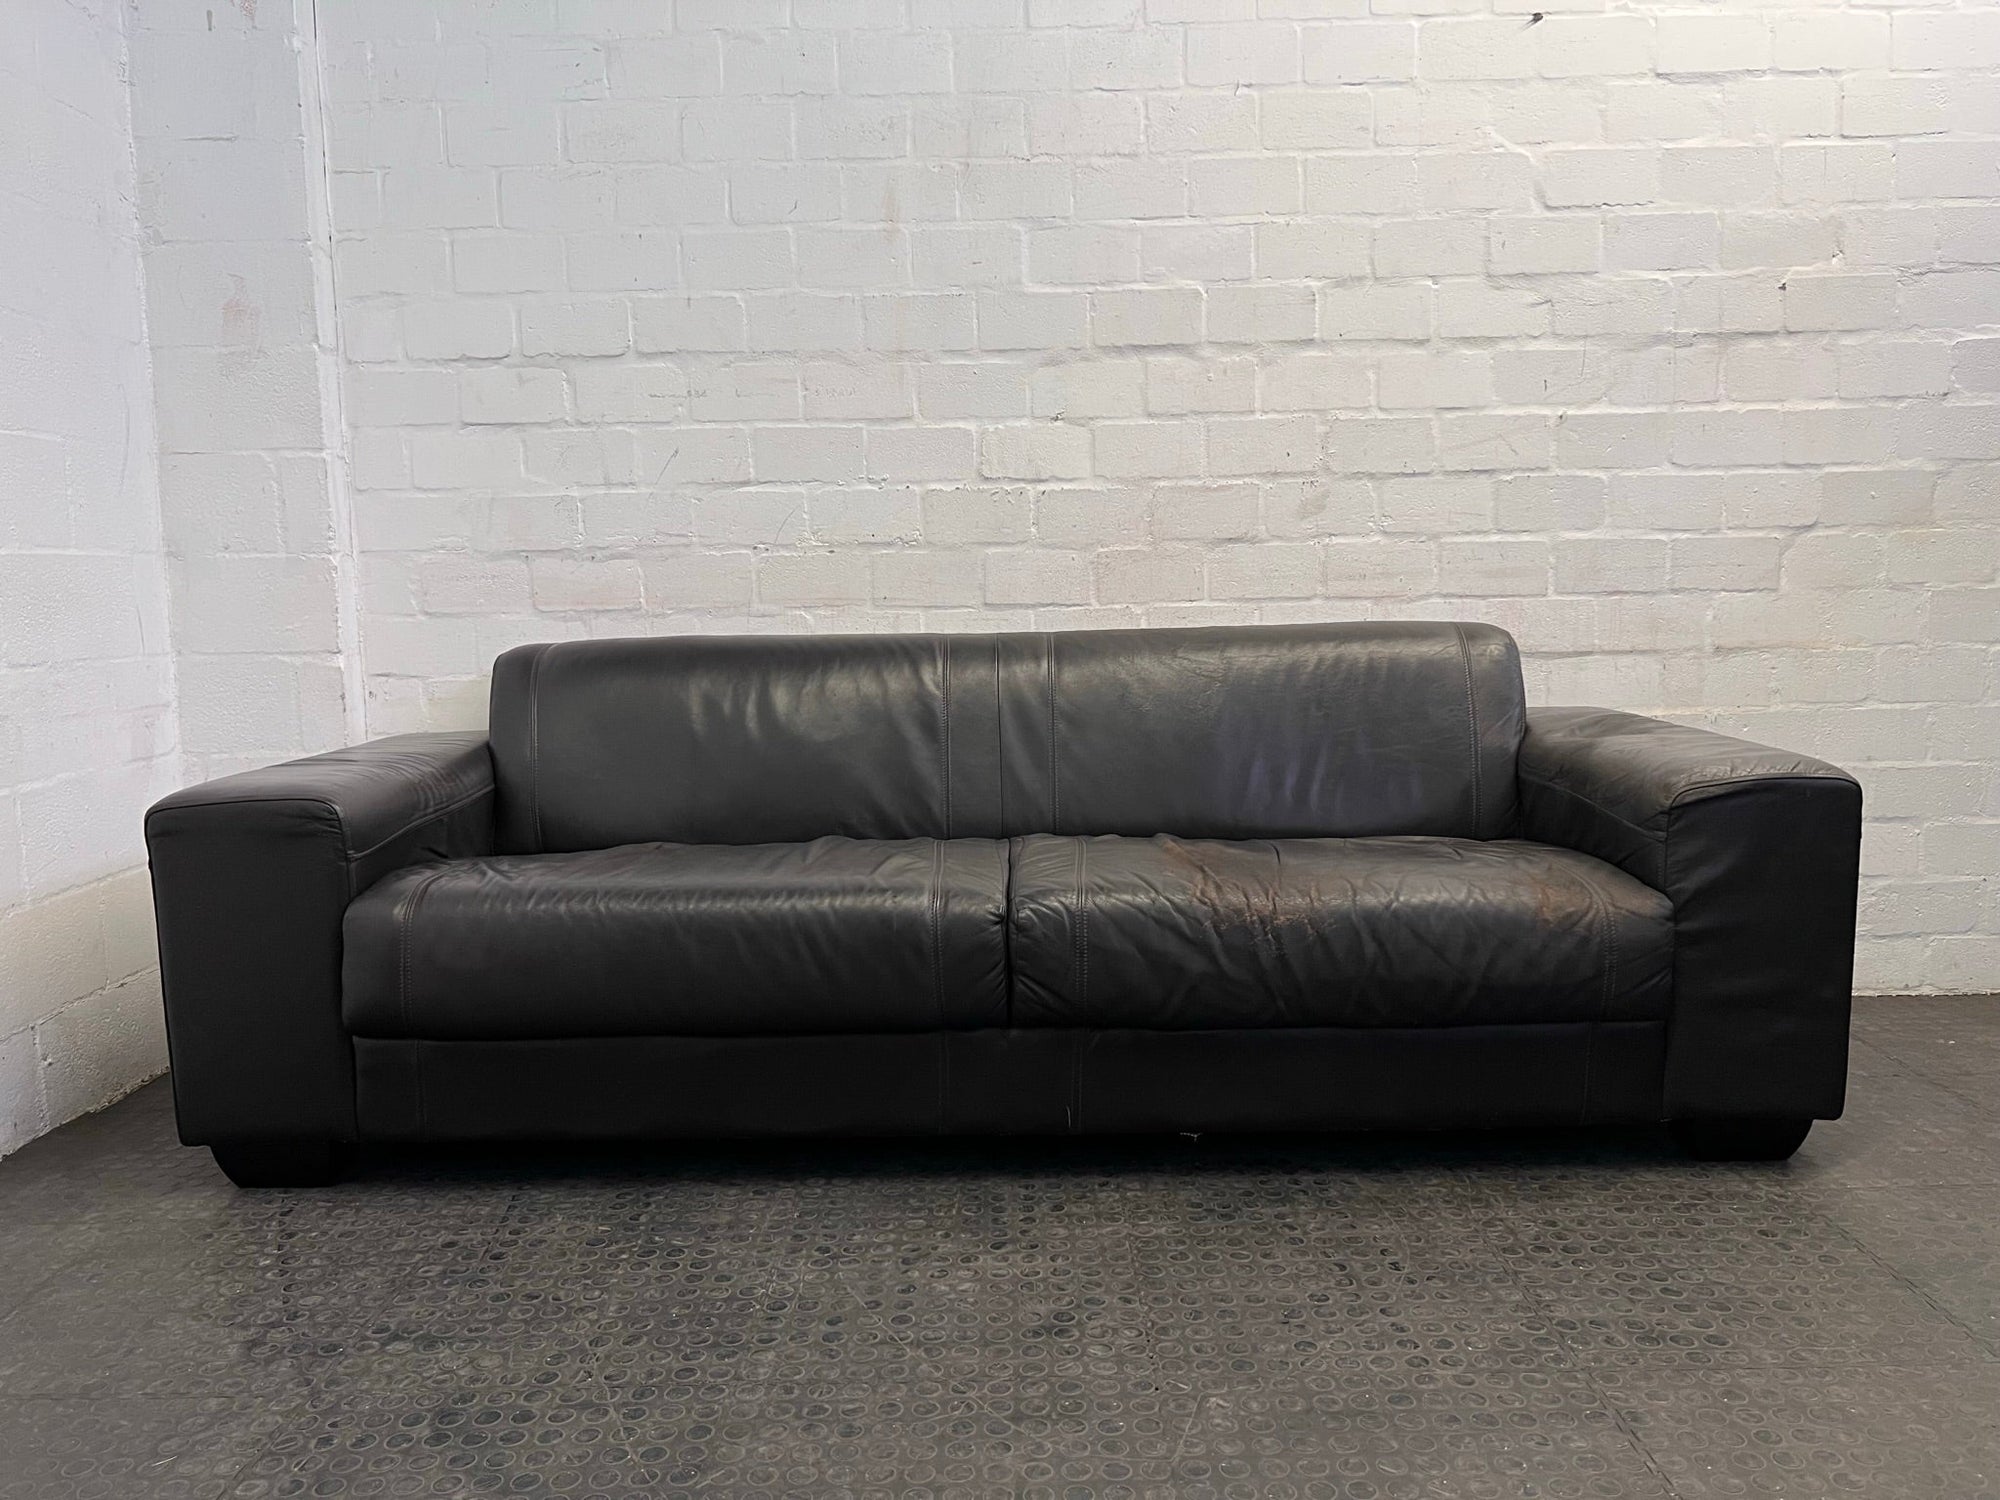 Brown Pleather 3 Seater Couch - REDUCED